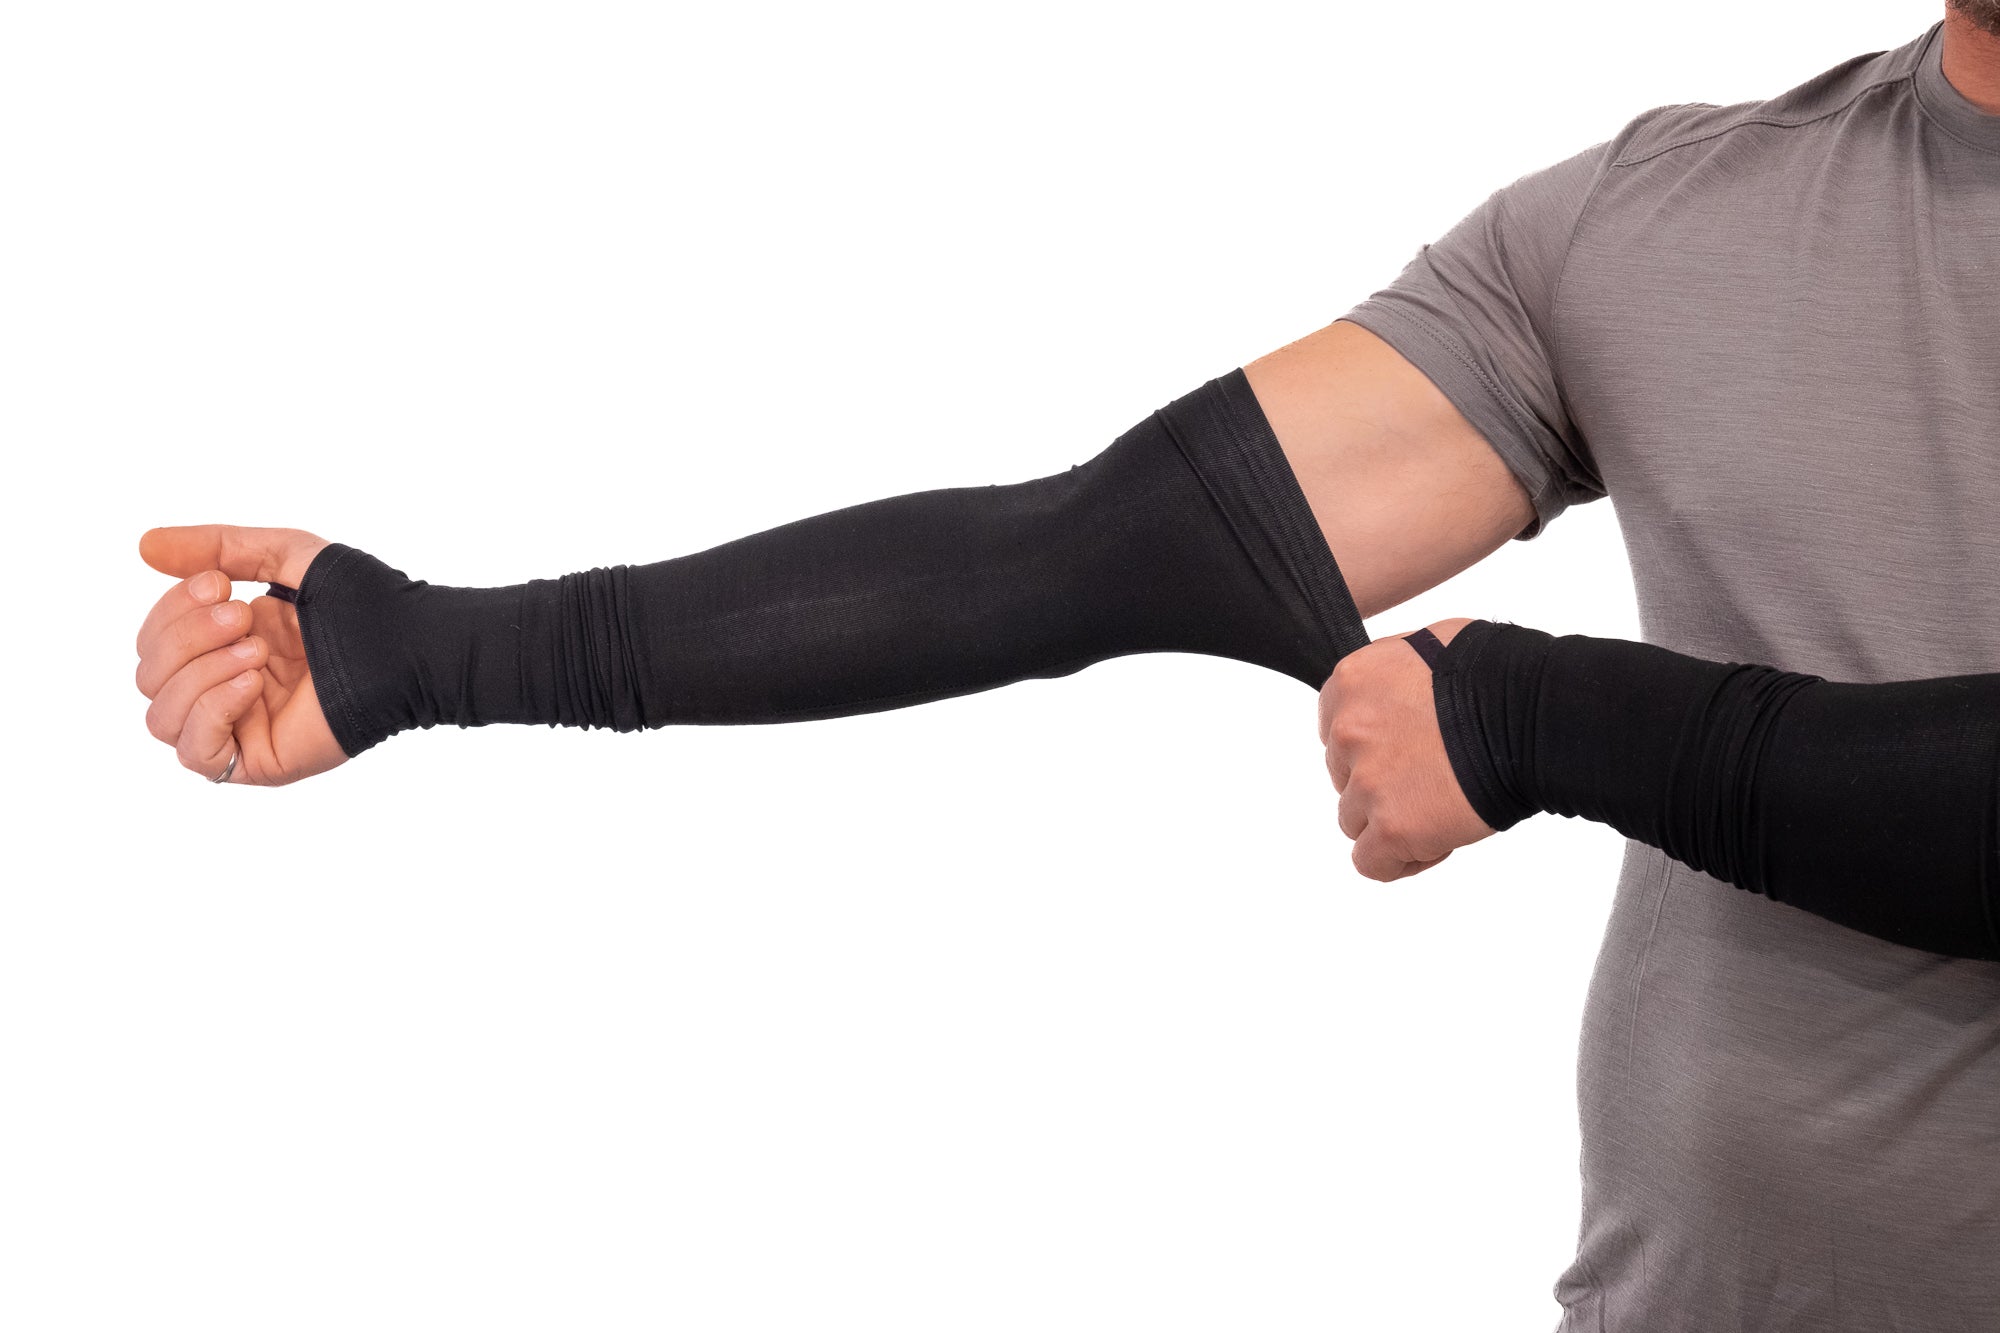  CompressionZ Compression Arm Sleeves for Men & Women